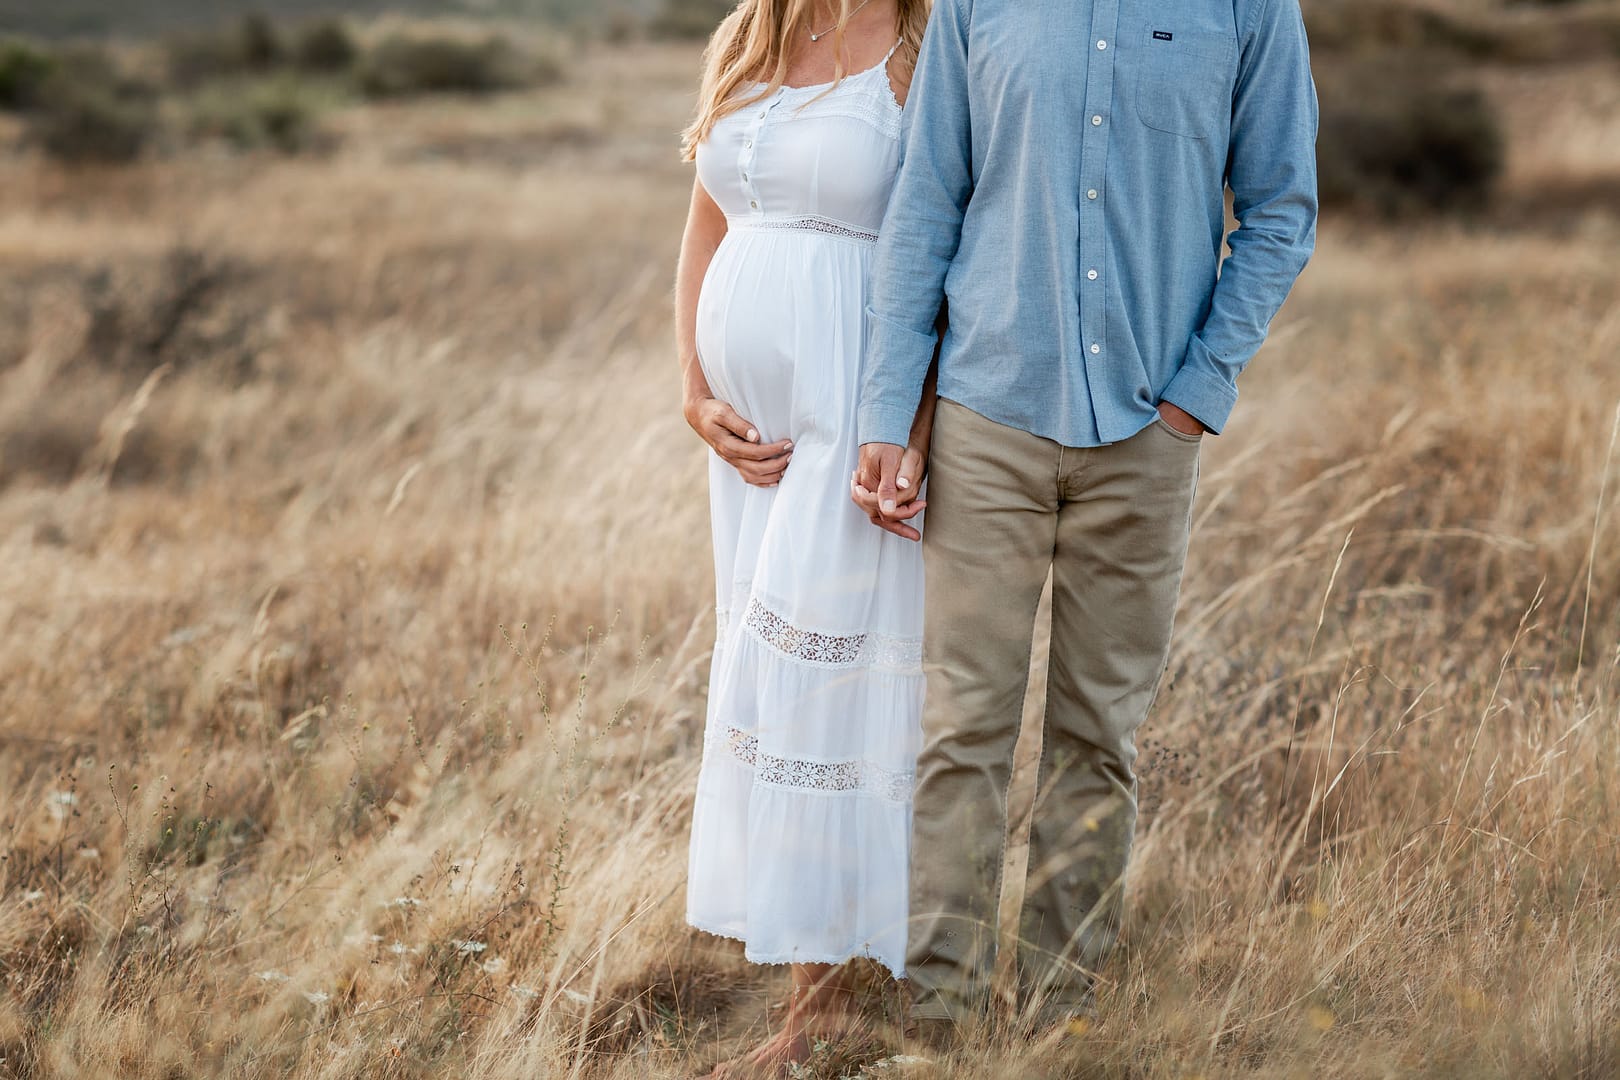 San Diego Maternity Photography of couple standing in an open field of grass, with the focus being on the belly and the couple holding hands.